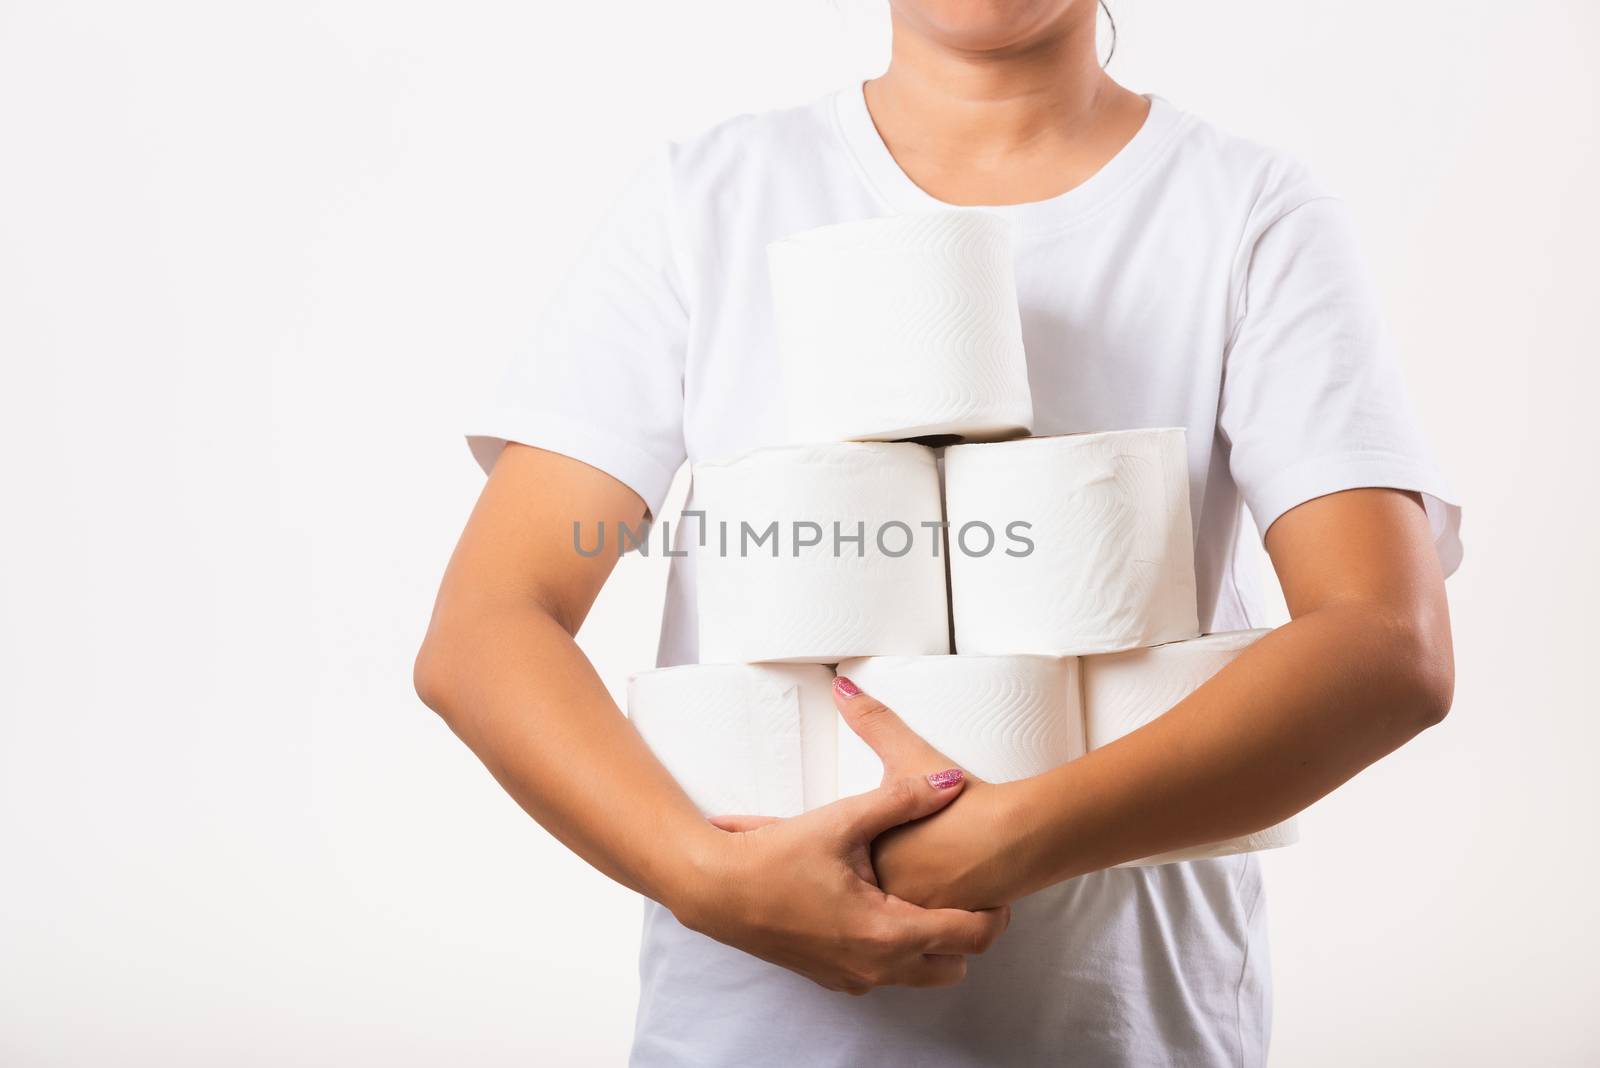 Woman stocking up she holding many rolls of toilet paper in arms by Sorapop